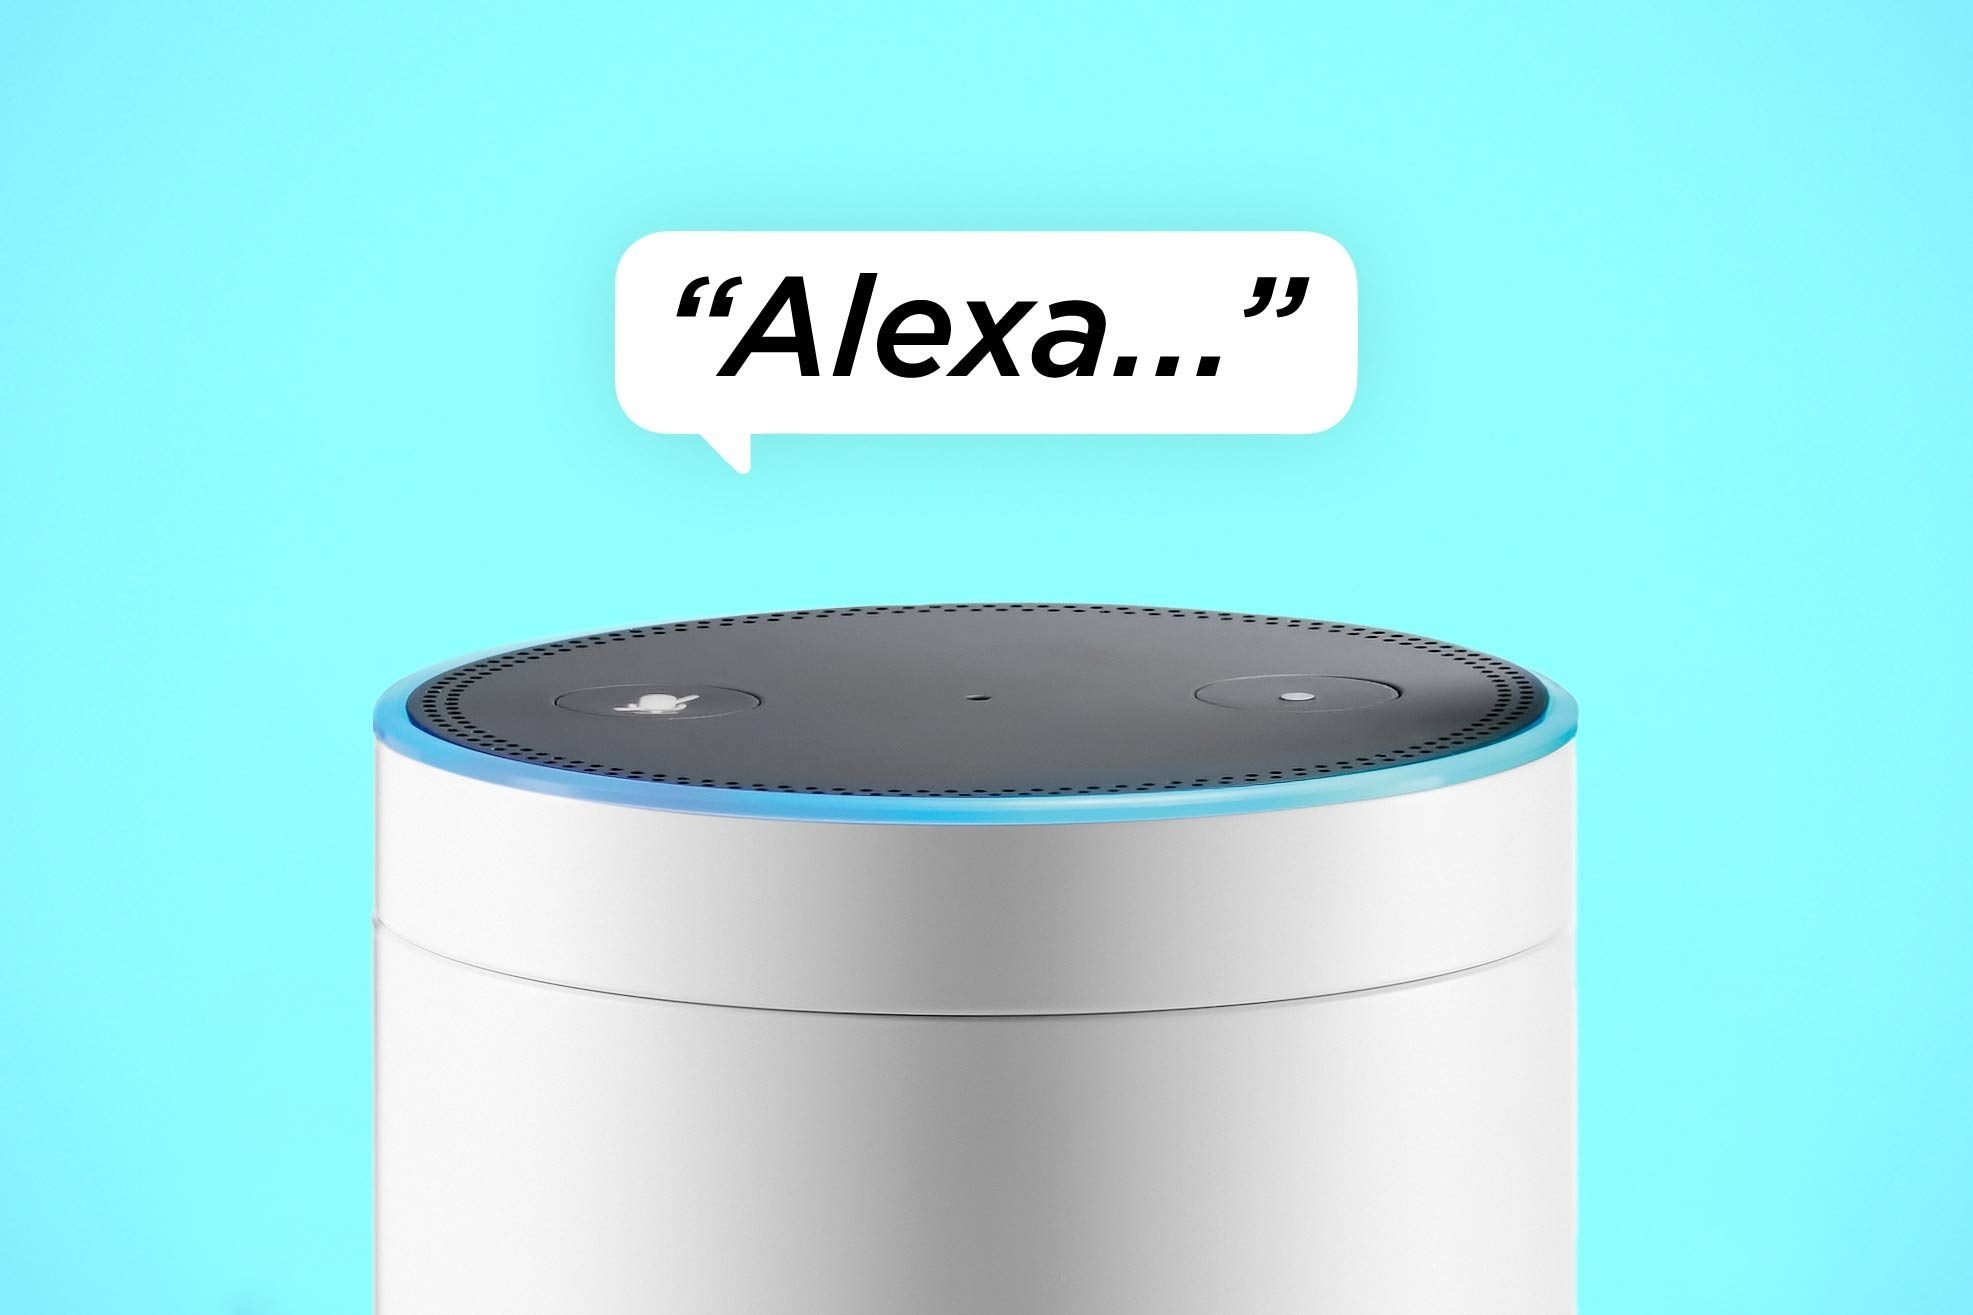 Questions to ask Alexa